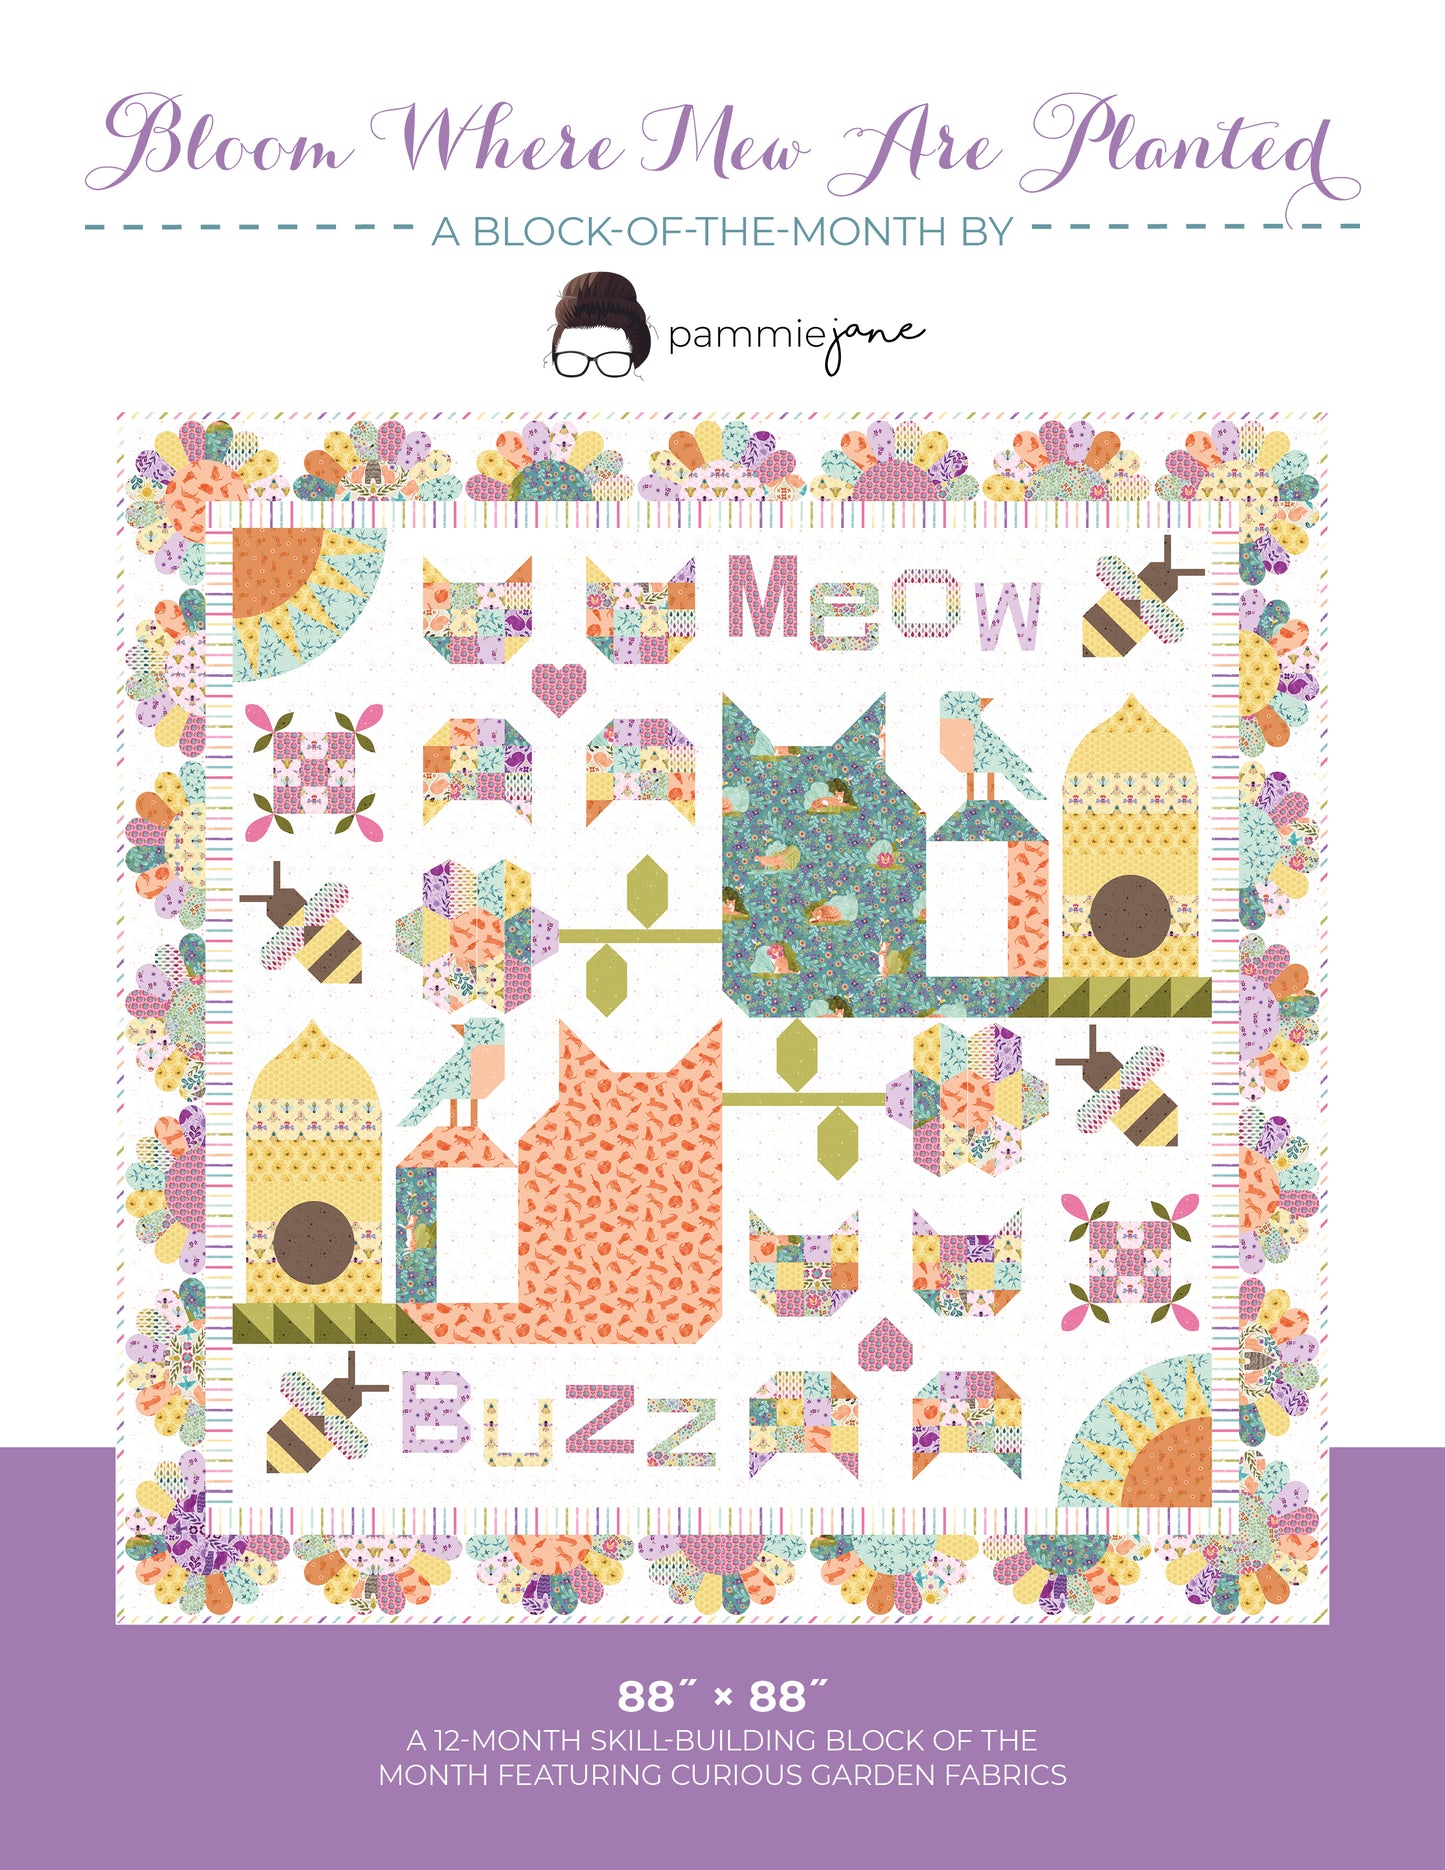 Bloom Where Mew Are Planted #301 Block of the Month Wholesale